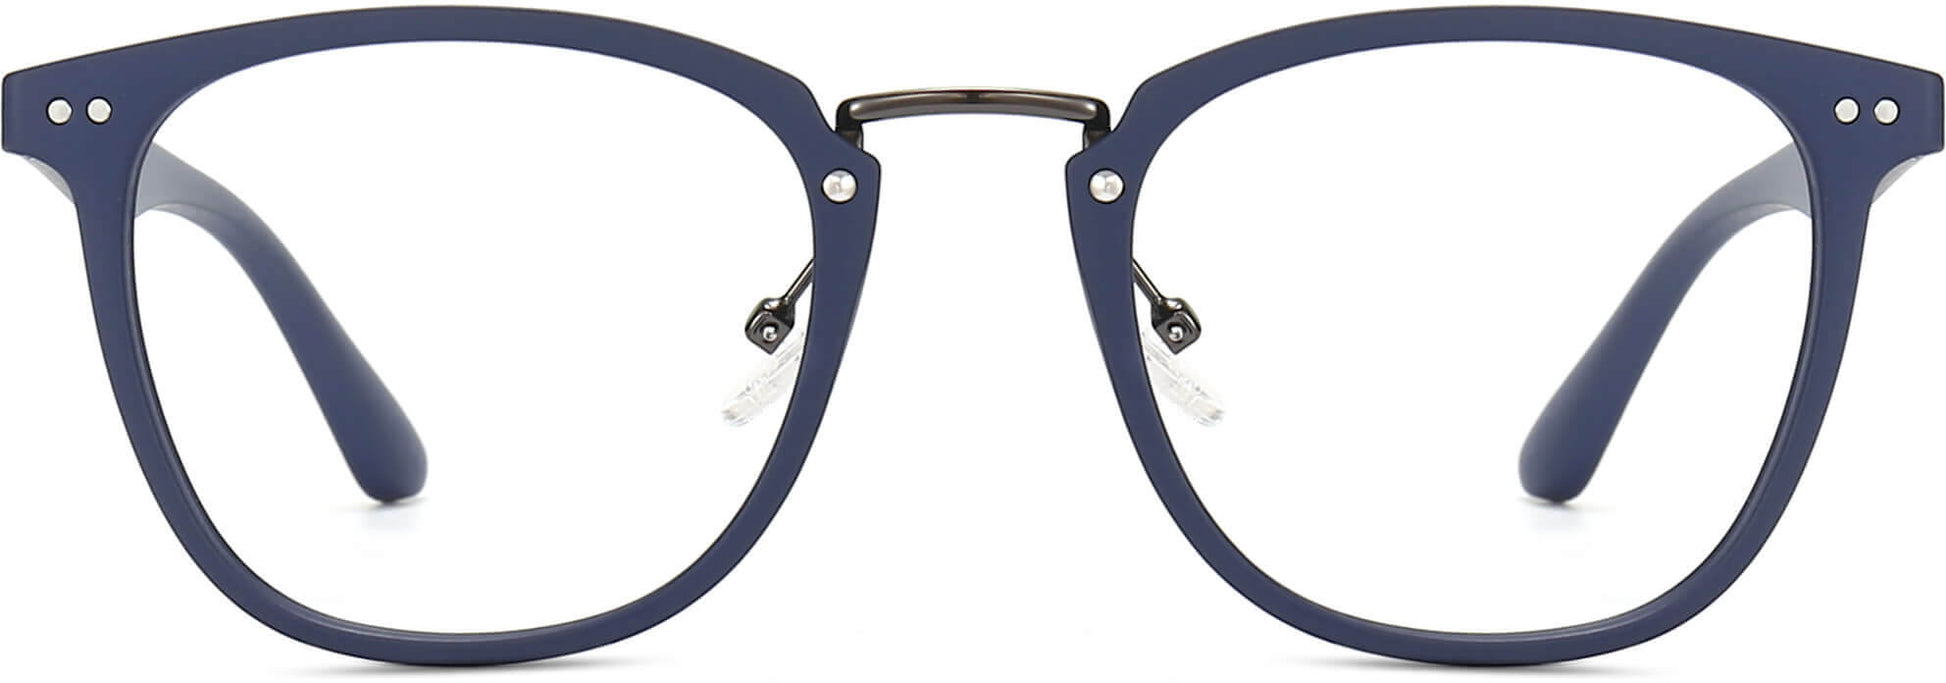 Chance Square Blue Eyeglasses from ANRRI, front view